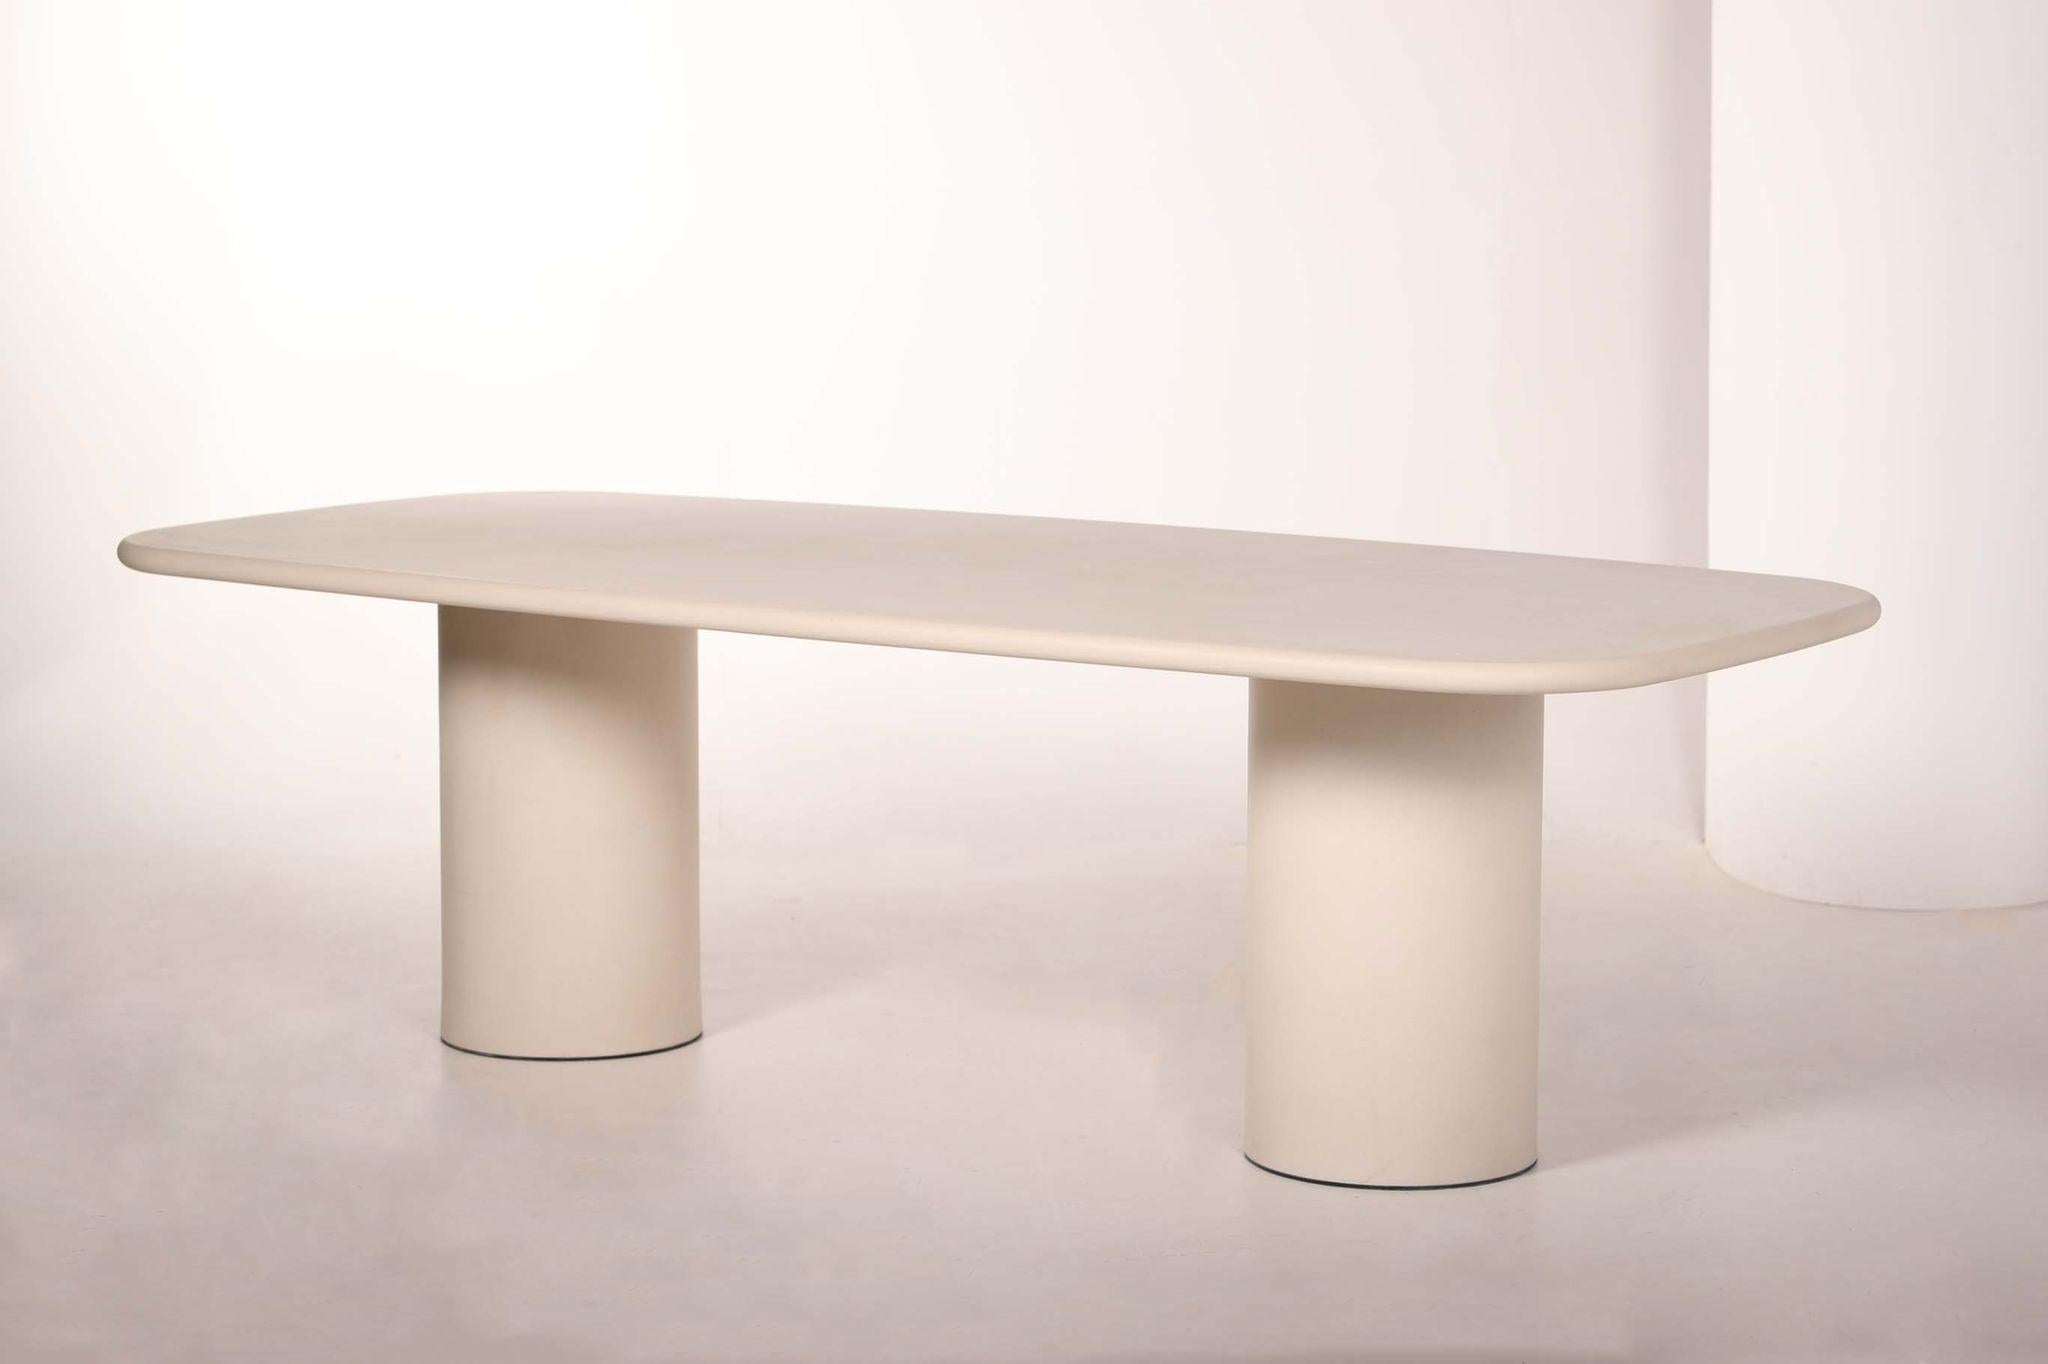 Natural plaster hand-sculpted outdoor dining table 360 by Philippe Colette
Dimensions: L 360 x W 110 cm
Customized height.
10/12 pers.
Materials: mineral lime plaster.

Our tables are in mineral lime plaster, unlike mortex, they are very